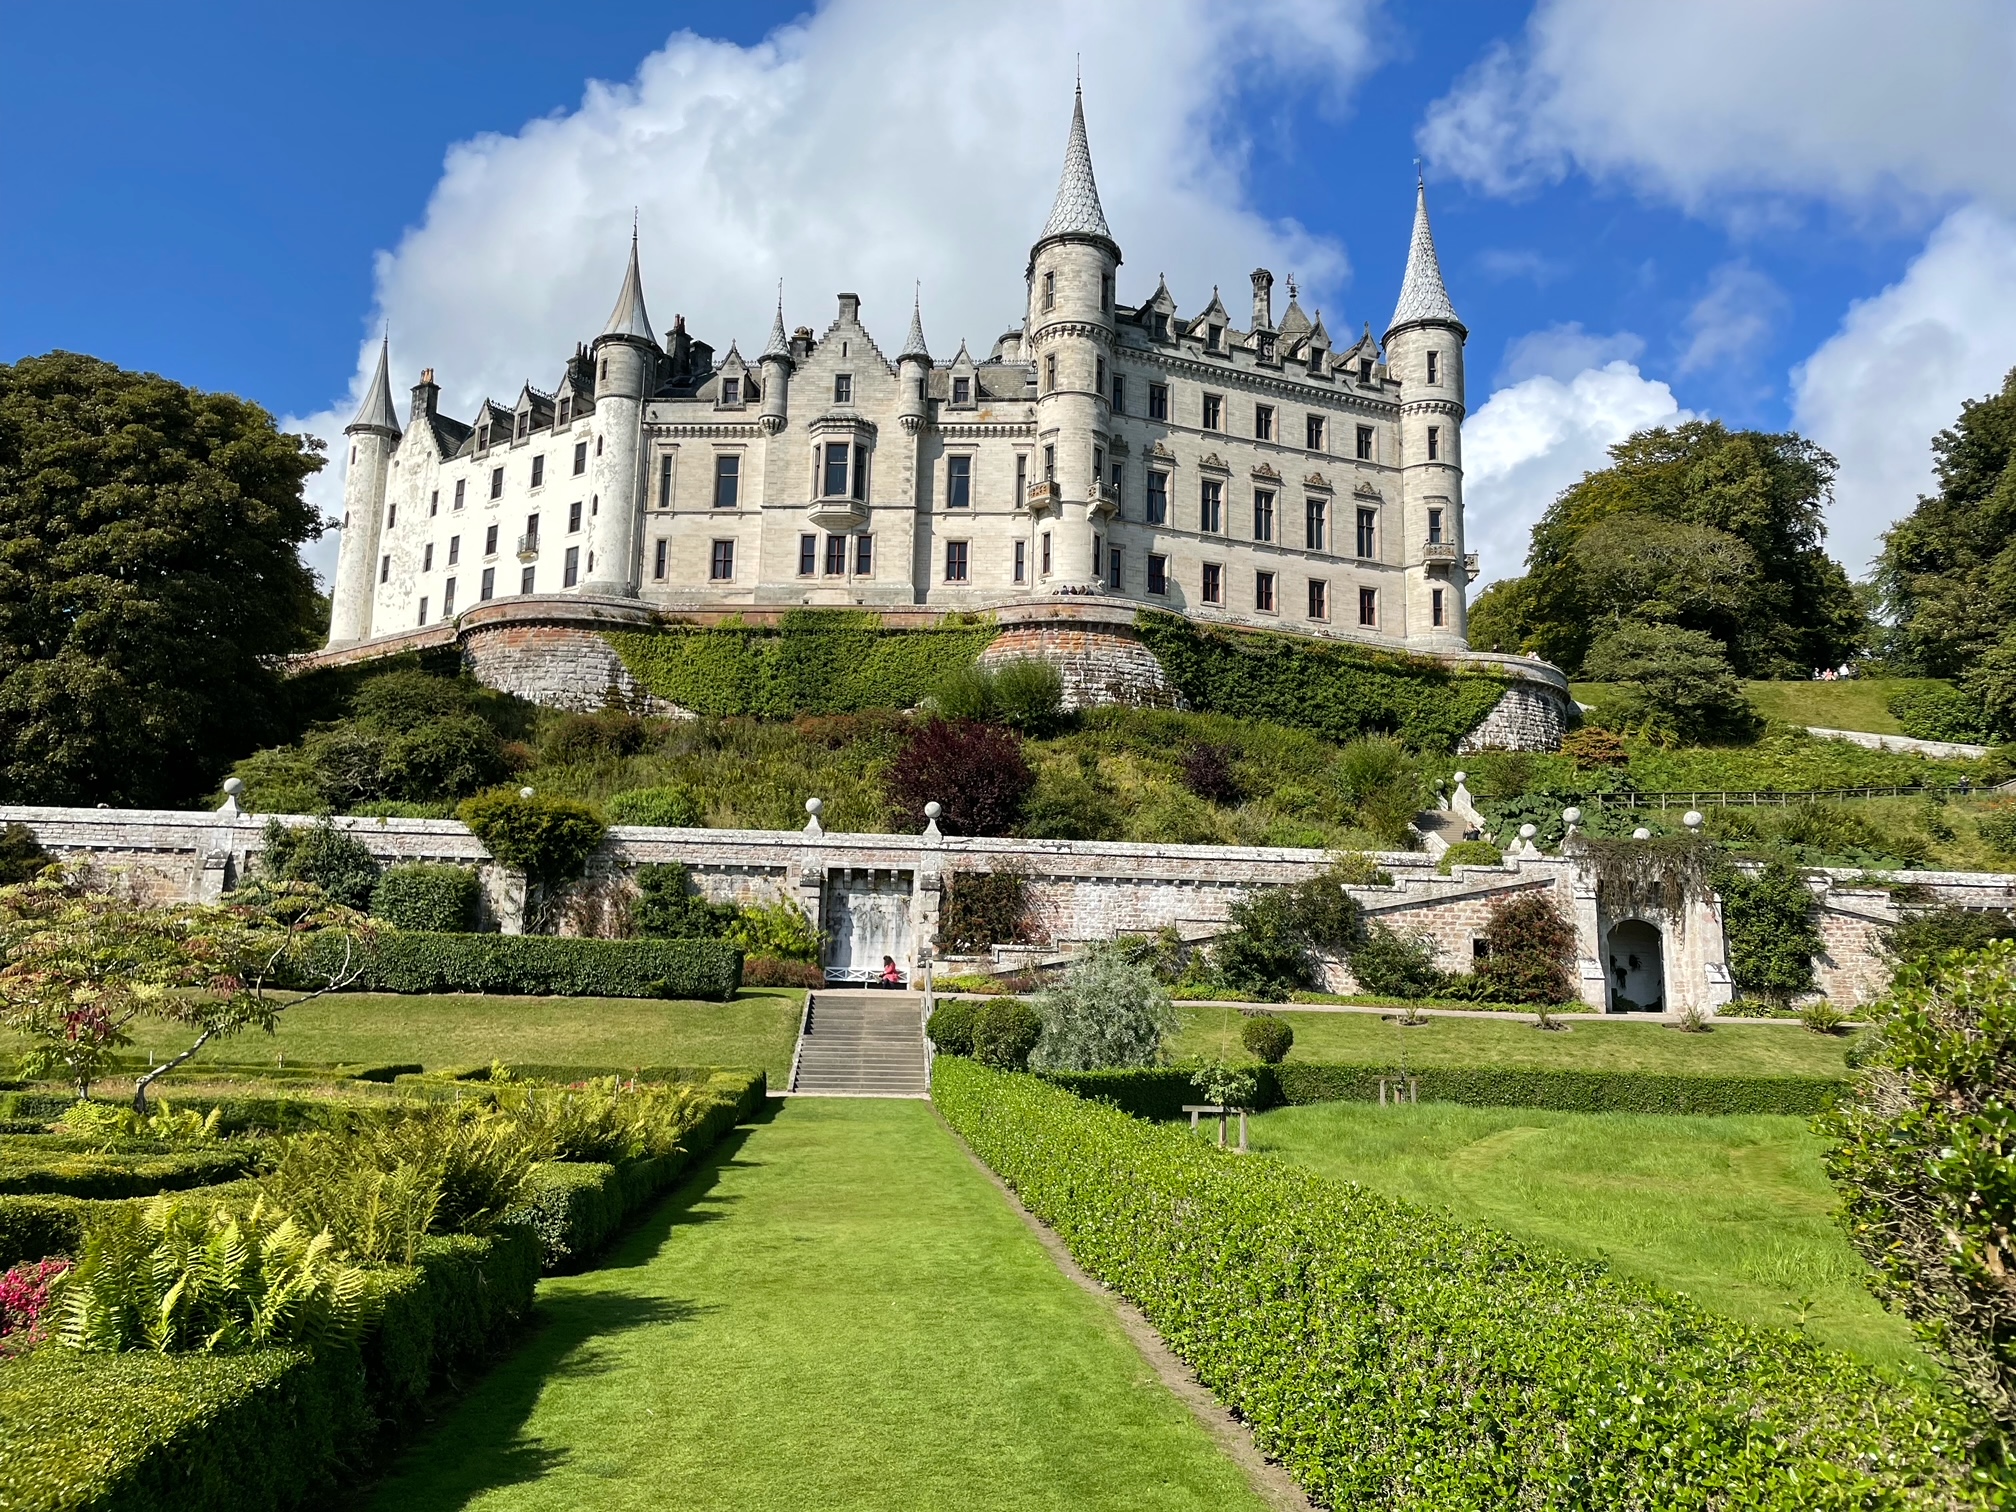 Dunrobin Castle is picture perfect with it's turrets and elaborate gardens. If you can only visit one castle in your life, make it this one.